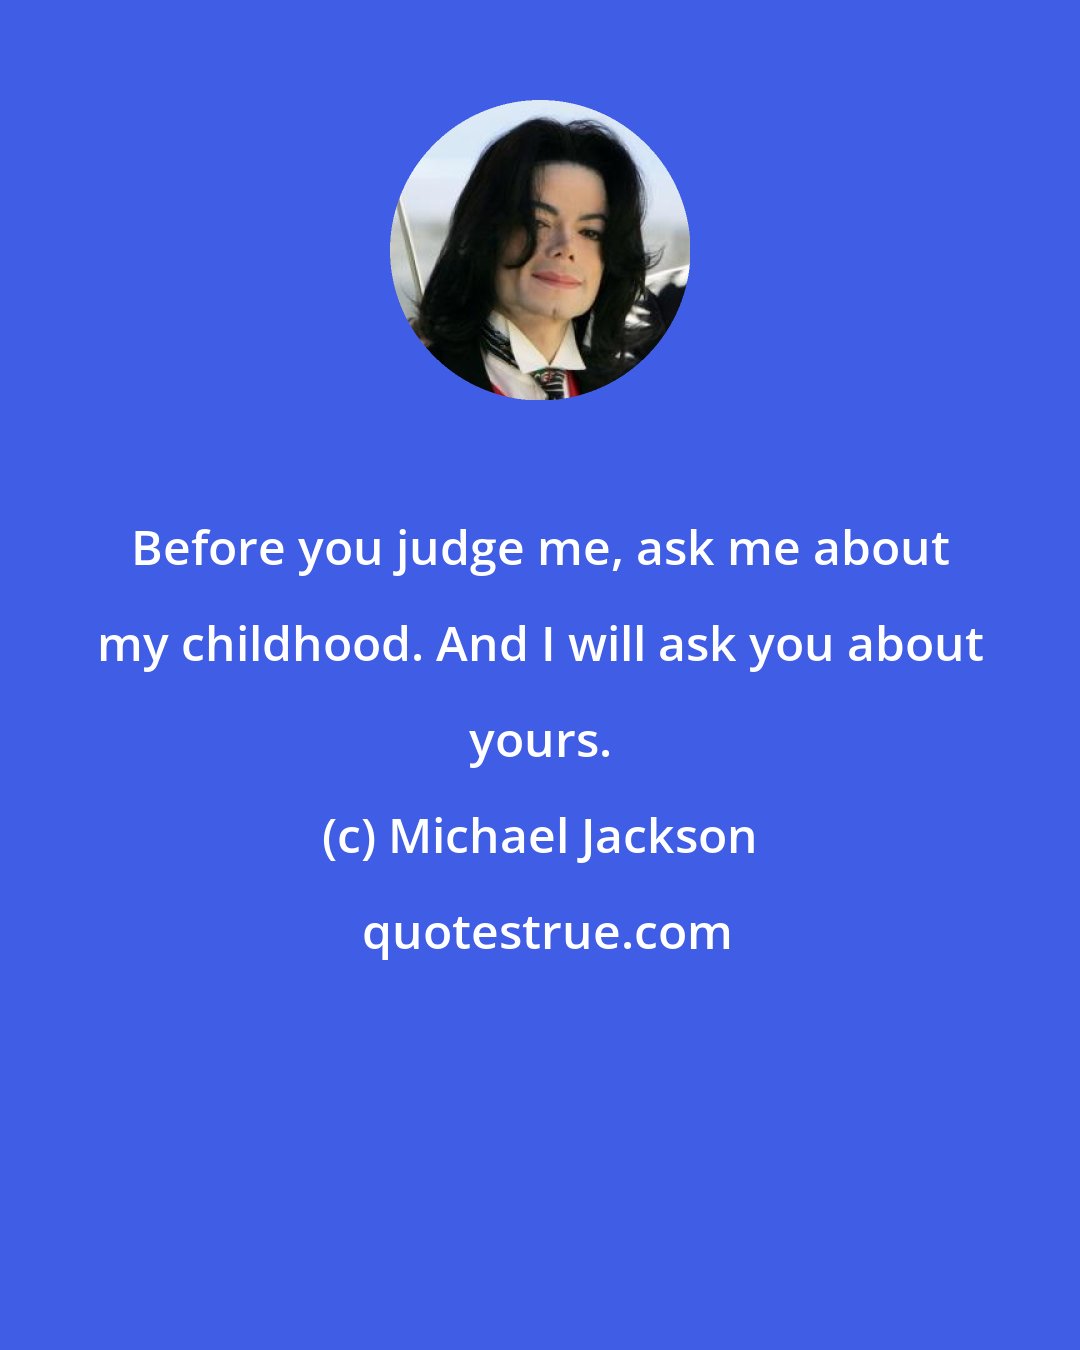 Michael Jackson: Before you judge me, ask me about my childhood. And I will ask you about yours.